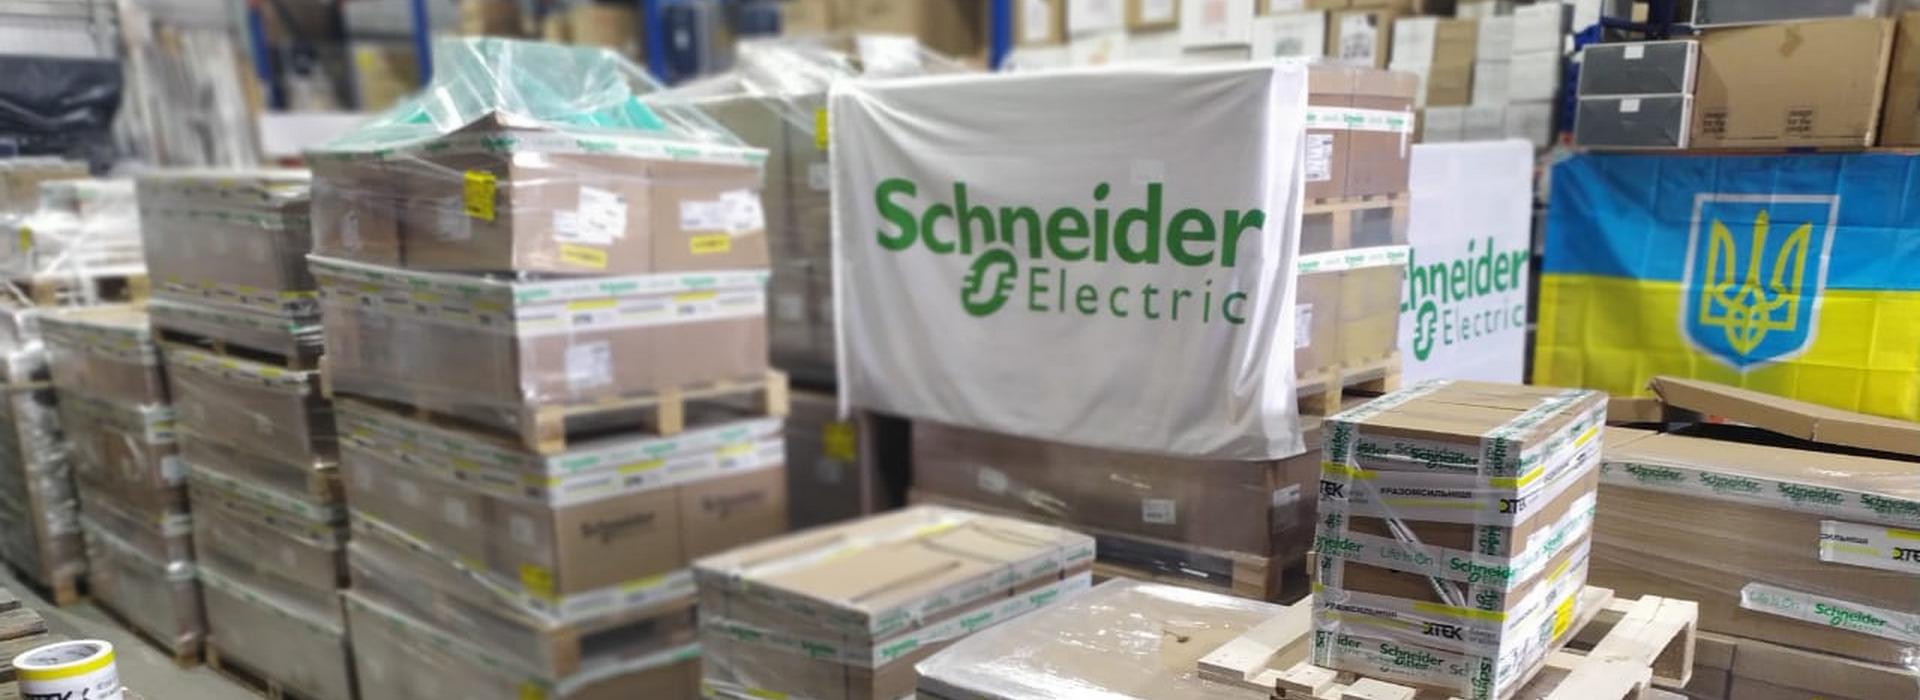 Schneider Electric Donates Electrical Equipment to Restore Essential Humanitarian Energy Supplies in Ukraine; Responds to World Economic Forum Call-to-Action